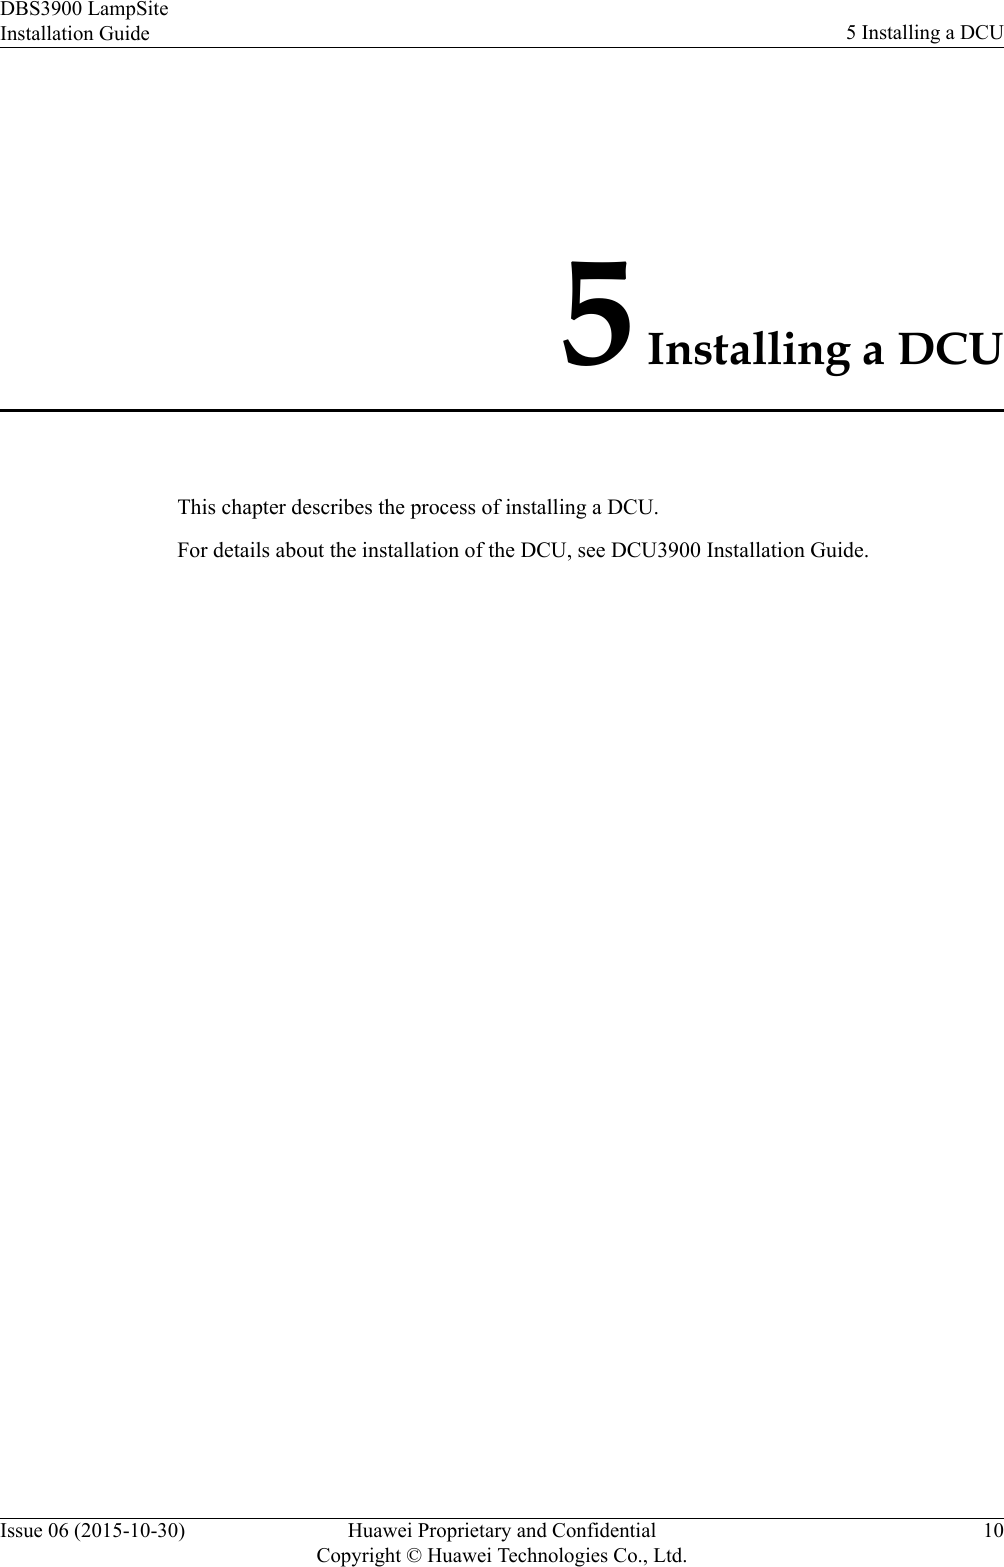 5 Installing a DCUThis chapter describes the process of installing a DCU.For details about the installation of the DCU, see DCU3900 Installation Guide.DBS3900 LampSiteInstallation Guide 5 Installing a DCUIssue 06 (2015-10-30) Huawei Proprietary and ConfidentialCopyright © Huawei Technologies Co., Ltd.10